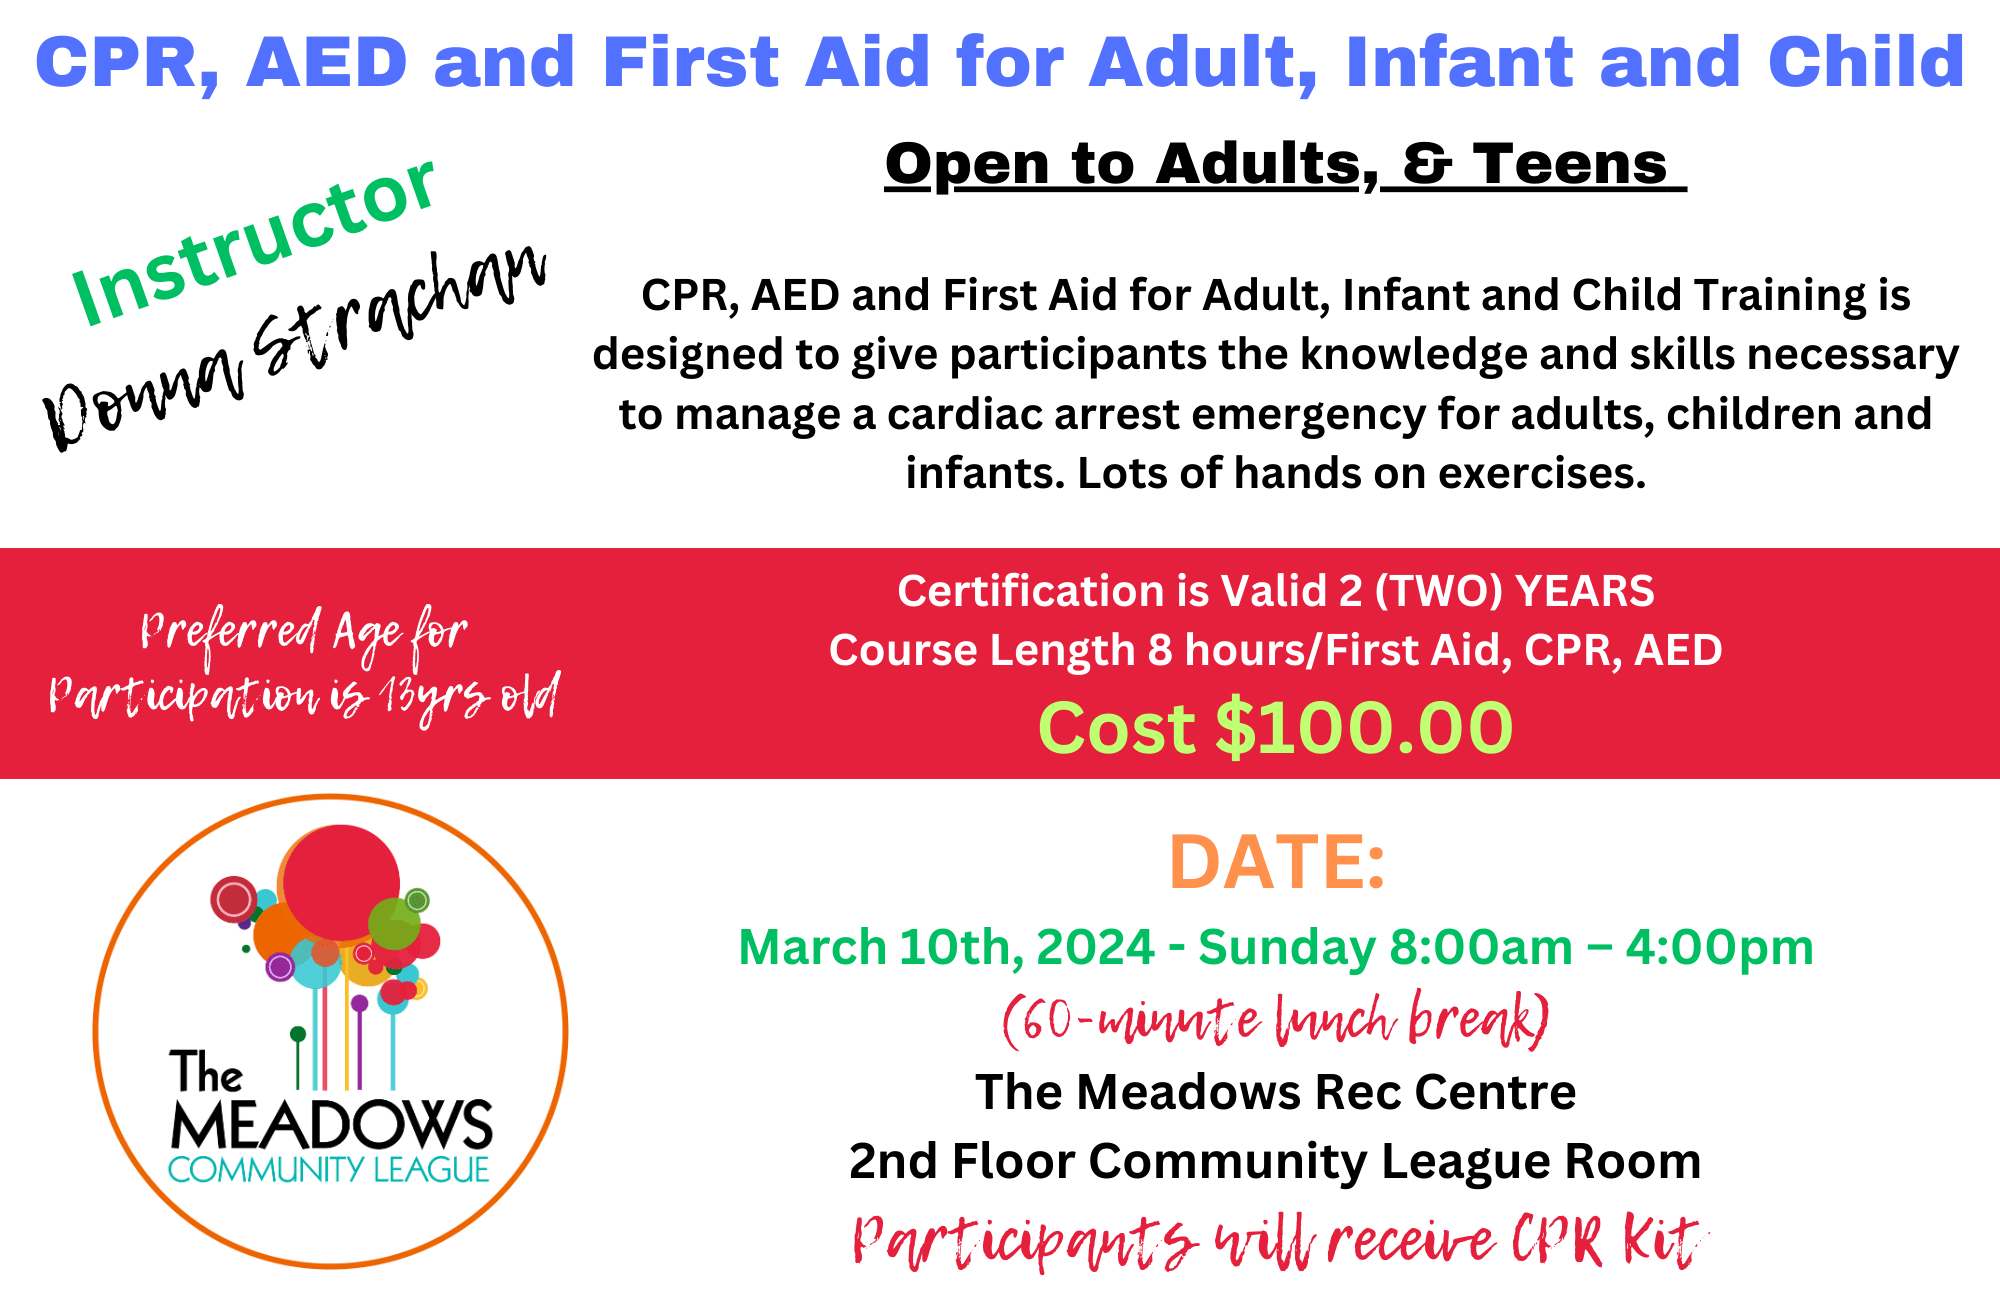 Information on the First Aid Class March 10